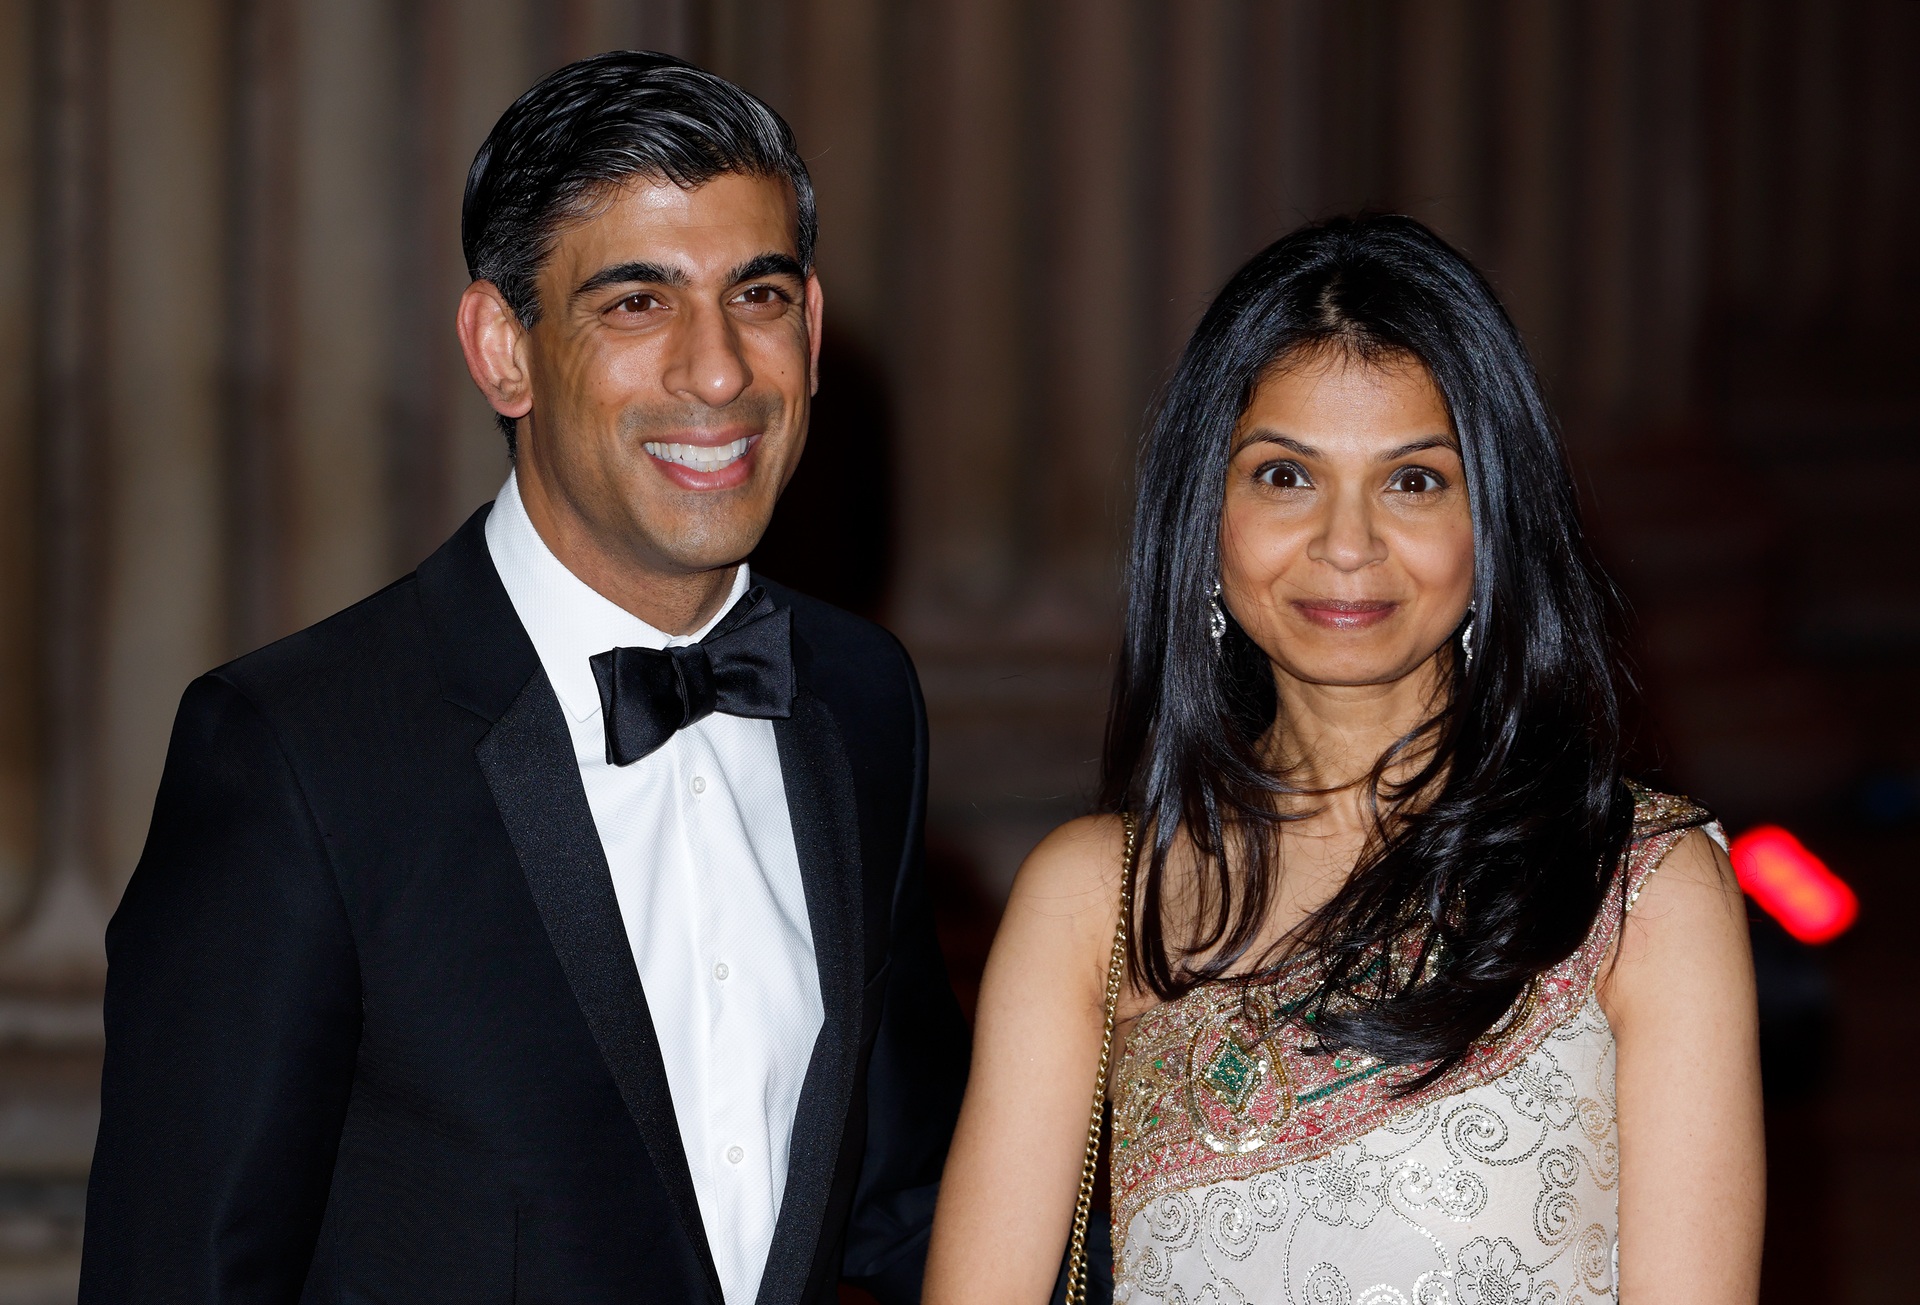 Rishi Sunak is facing an ethics investigation over concerns he did not detail his wife Akshata Murty's shares in a childcare firm that benefited from the Budget.